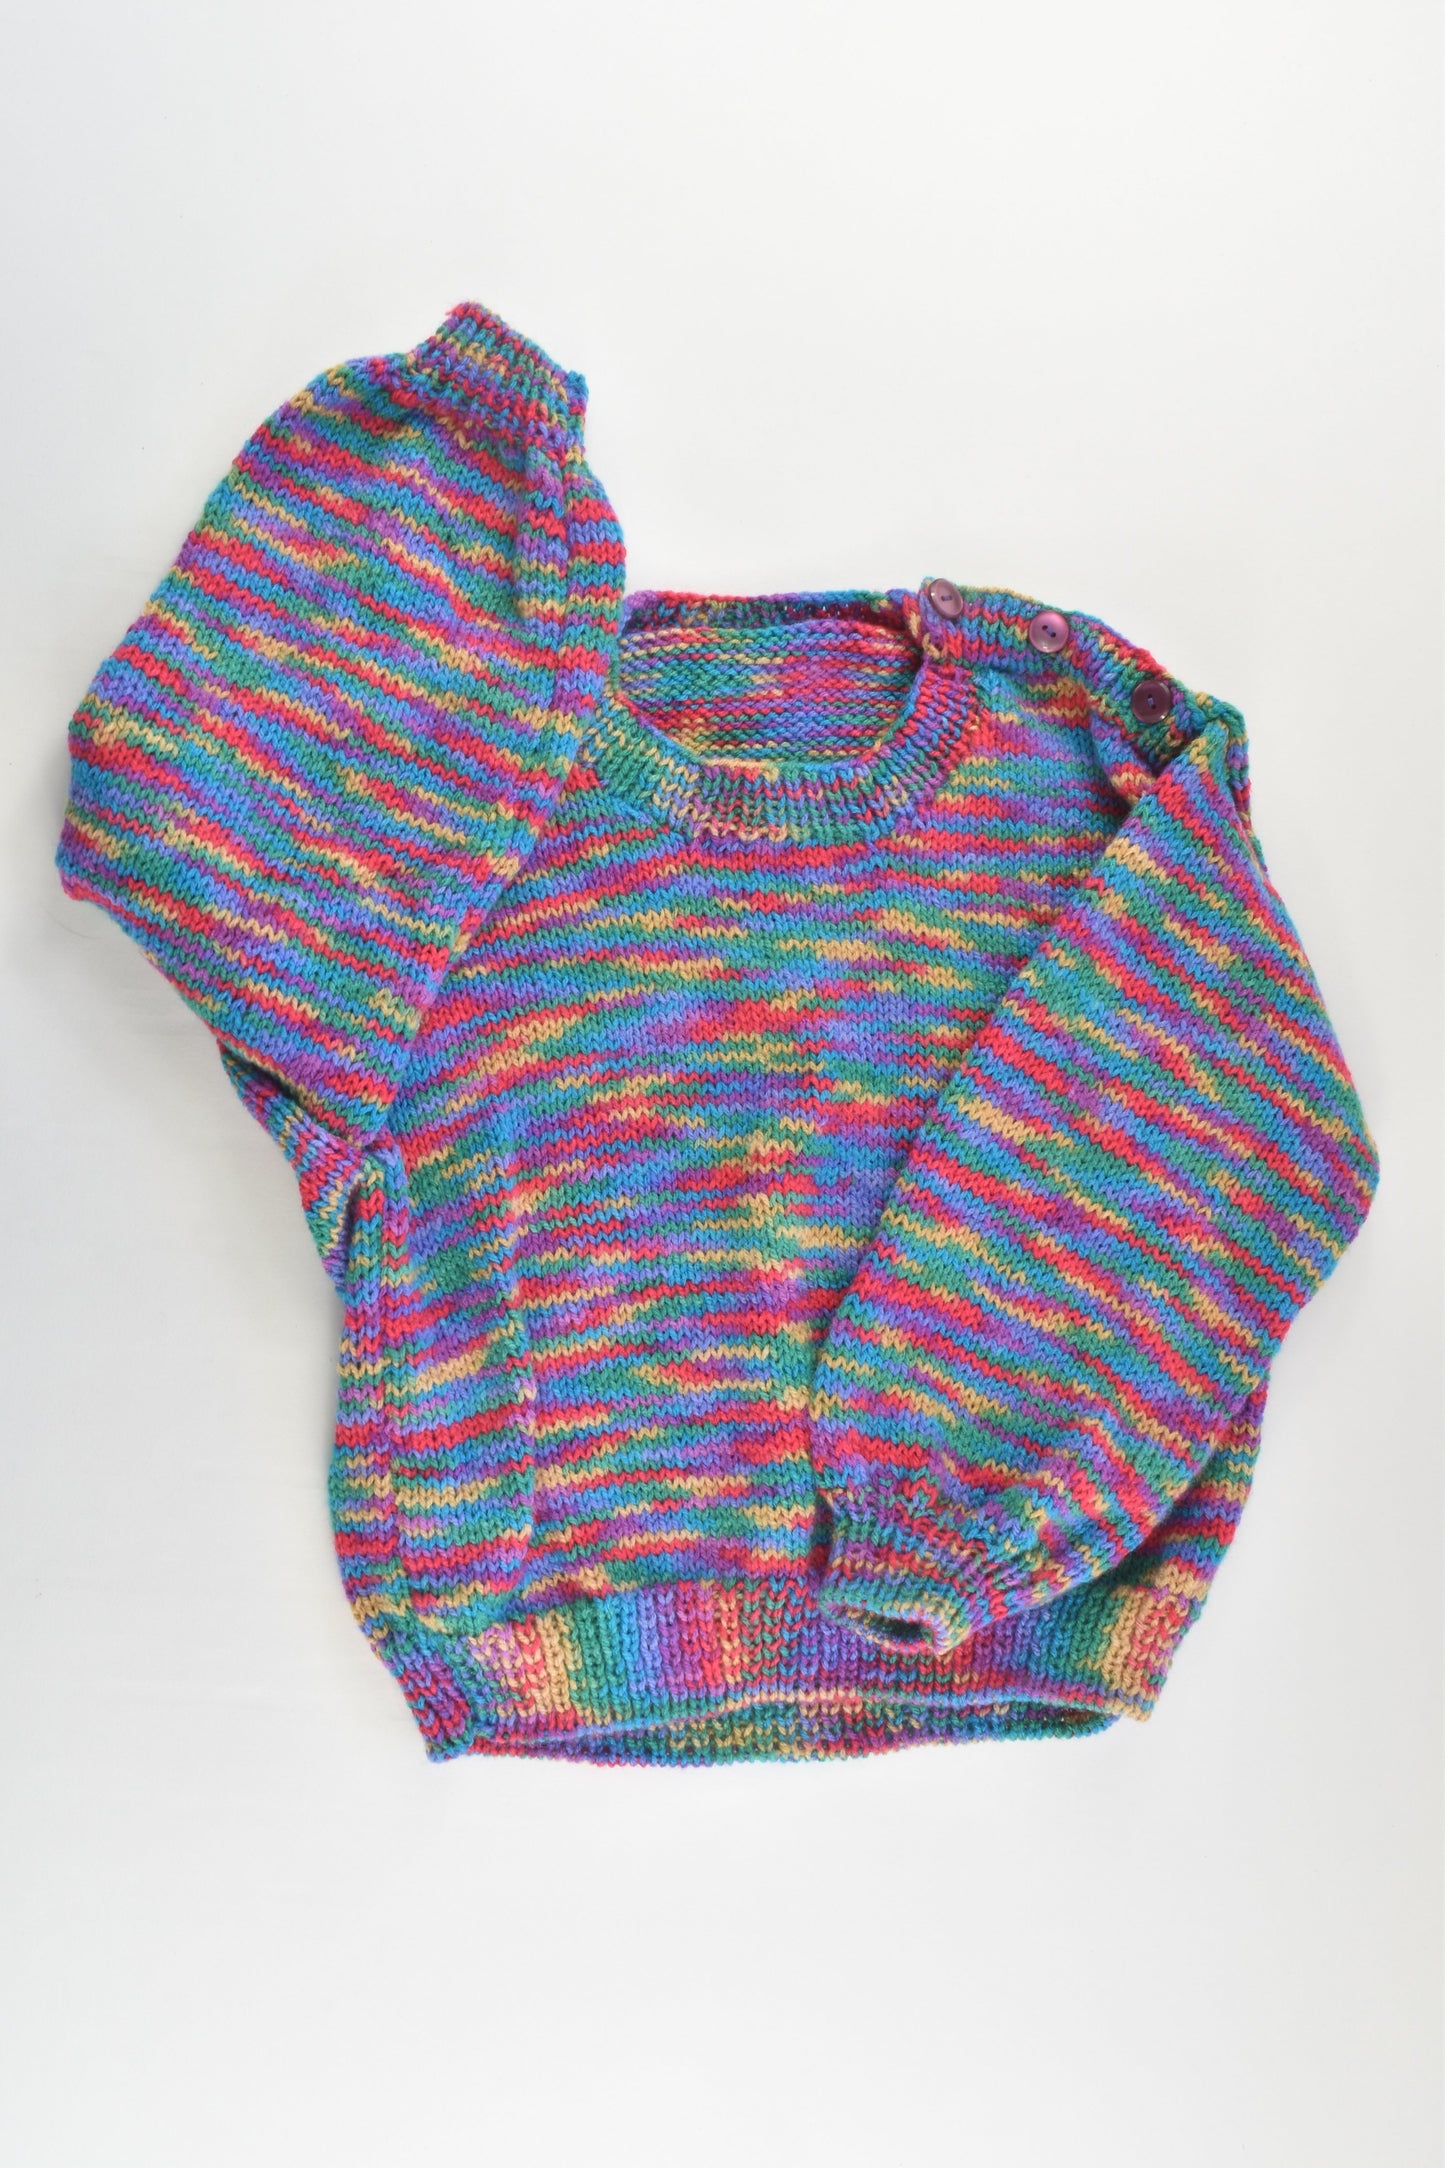 NEW Handmade Size approx 4-6 Rainbow Stripes Knitted Jumper